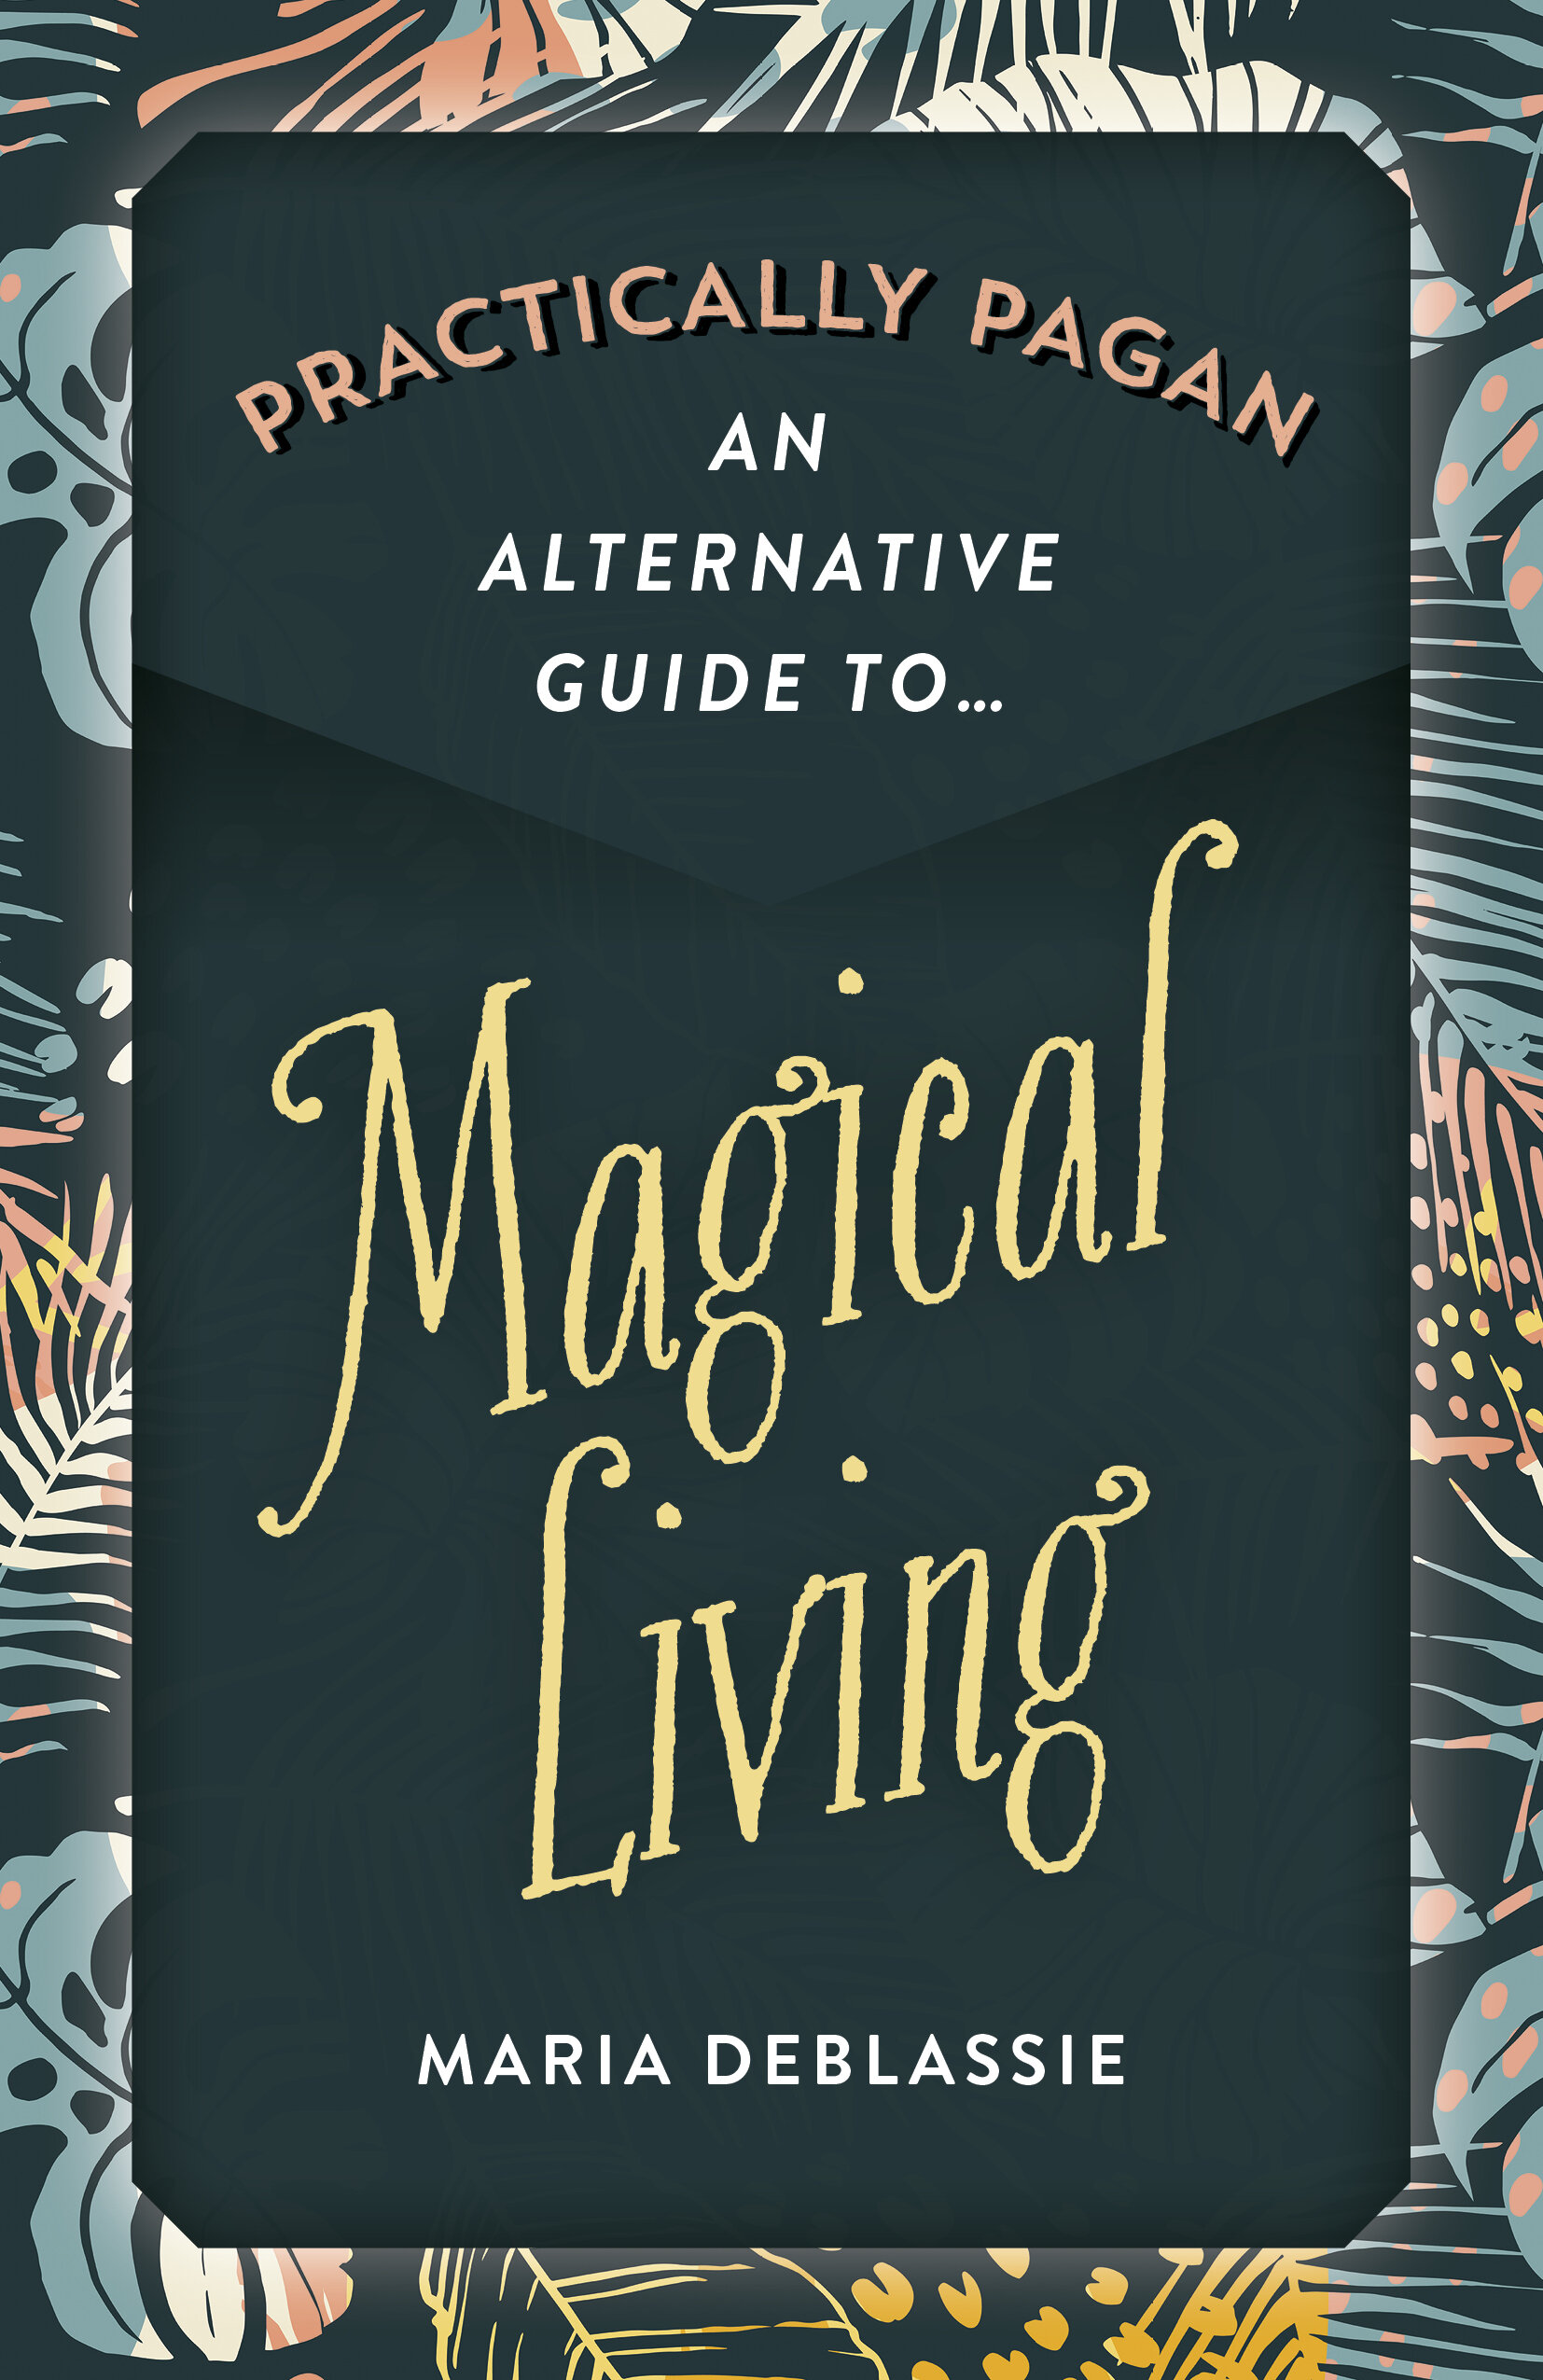 Practically Pagan ~ An Alternative Guide to Magical Living